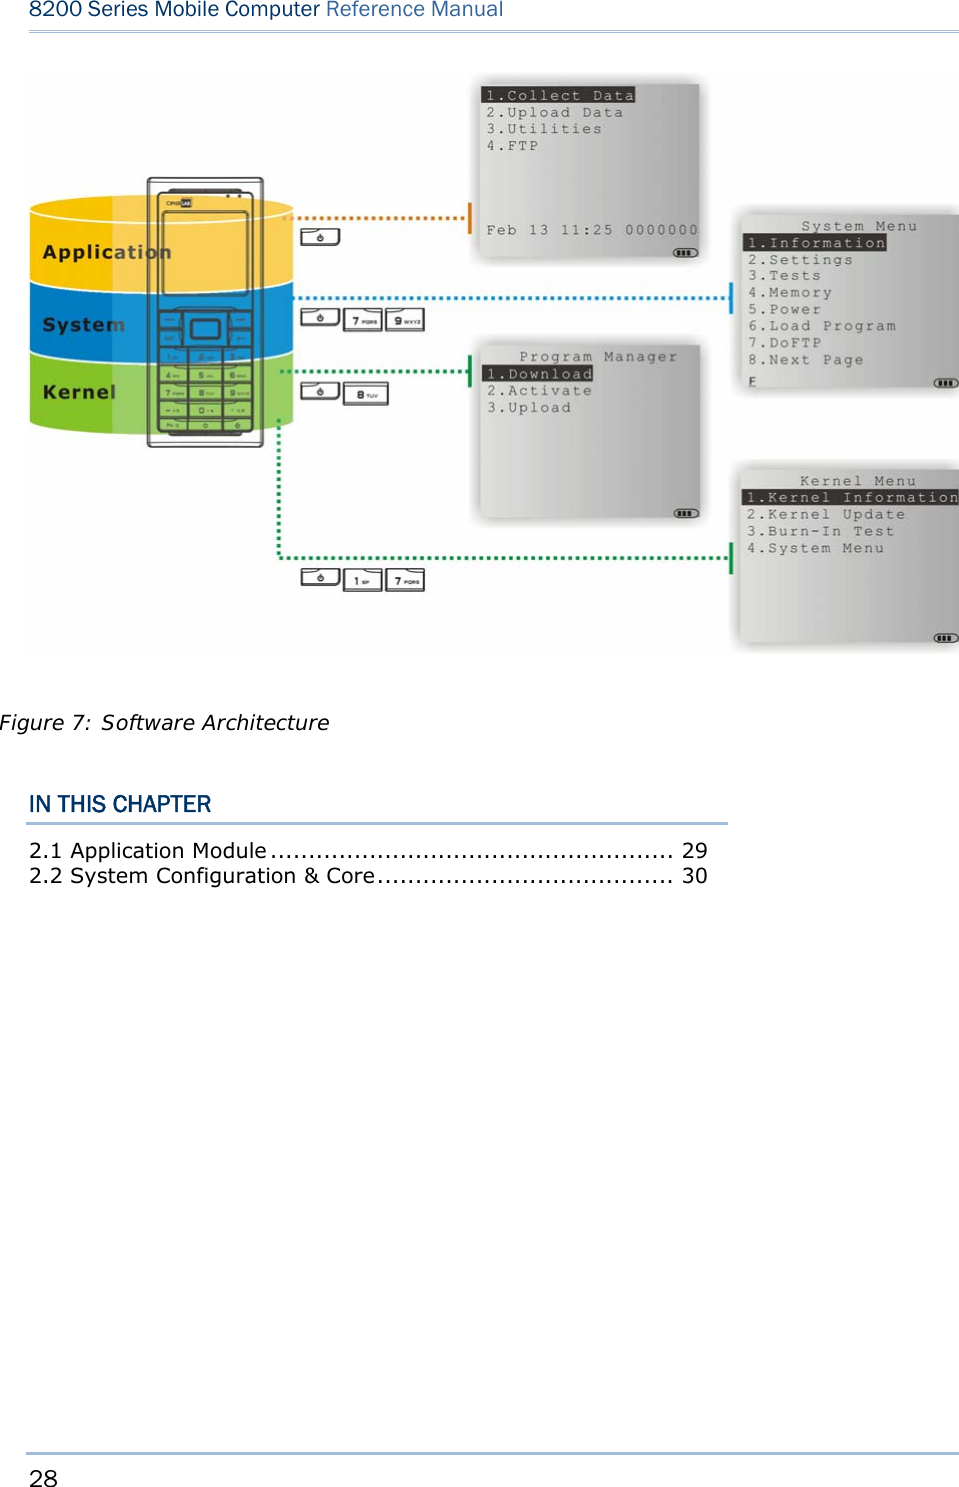 28  8200 Series Mobile Computer Reference Manual     IN THIS CHAPTER 2.1 Application Module ..................................................... 29 2.2 System Configuration &amp; Core ....................................... 30  Figure 7: Software Architecture 